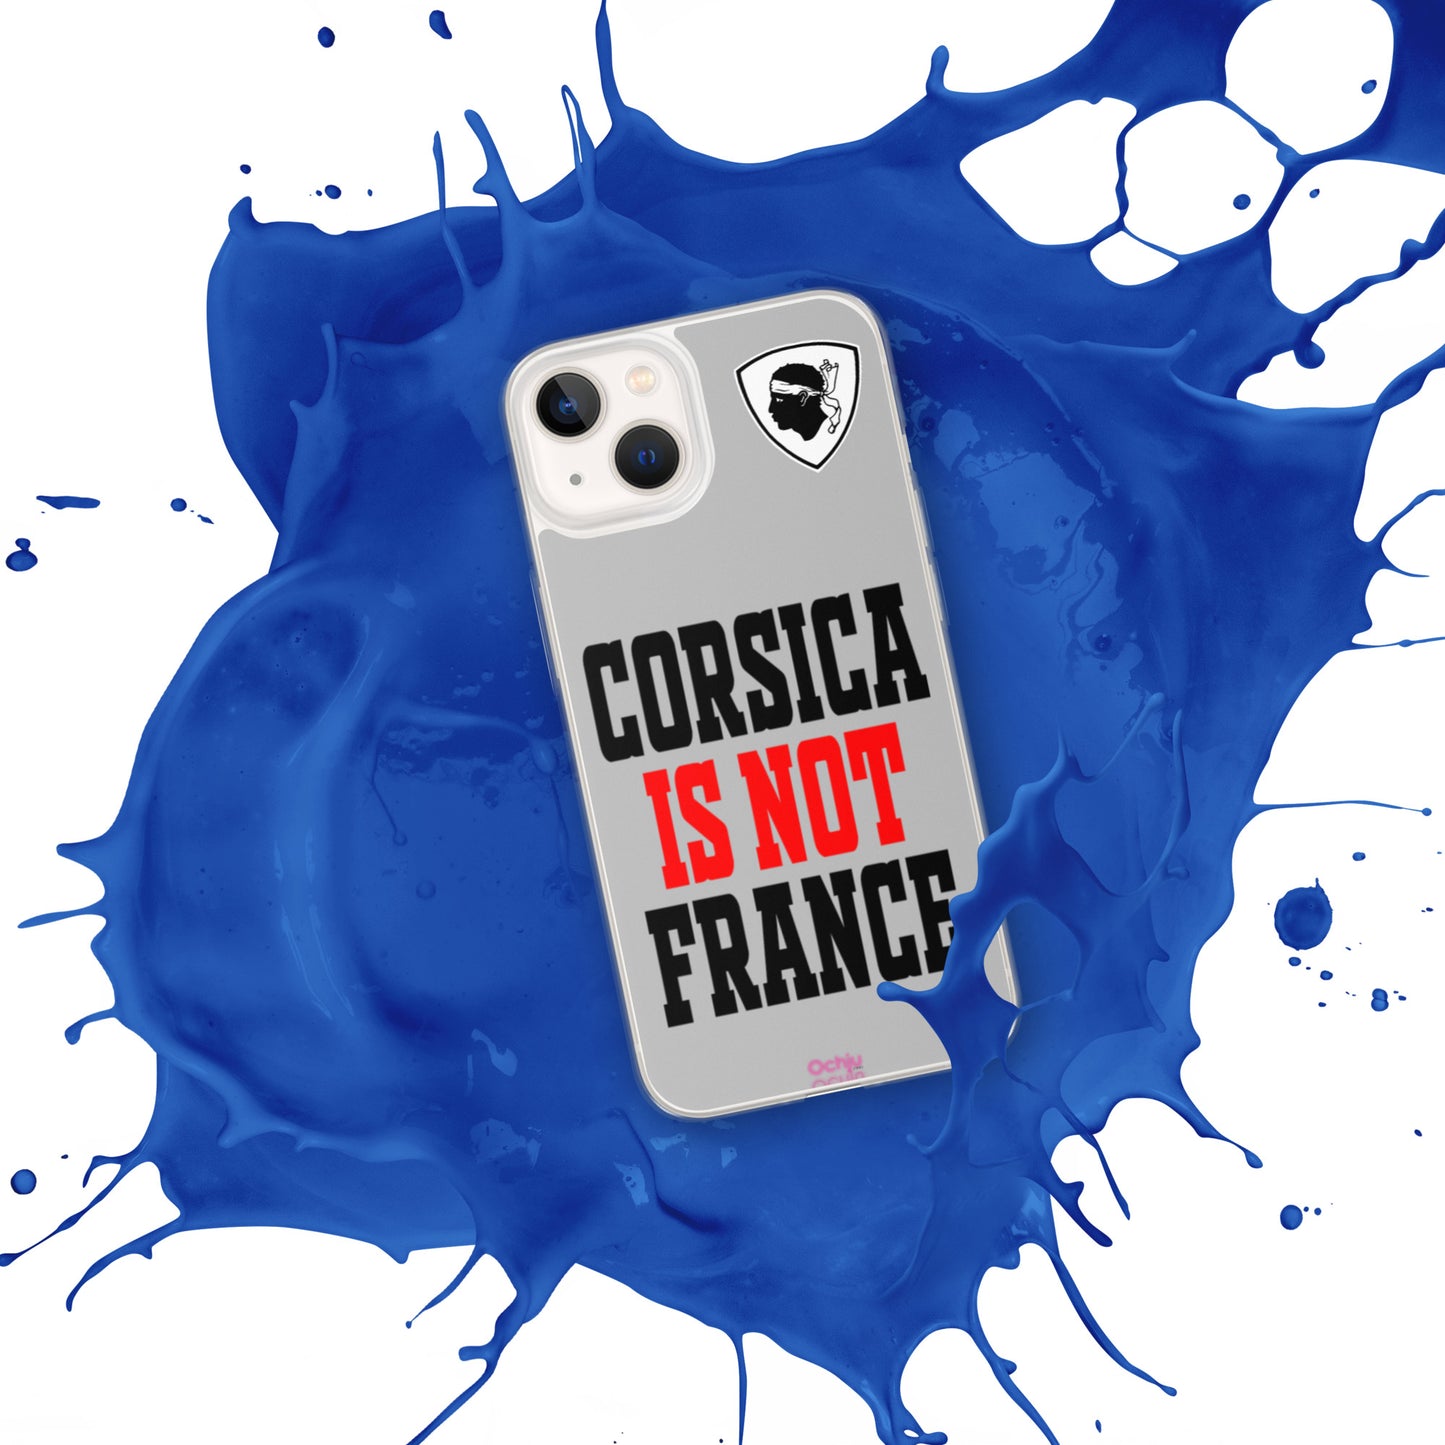 Coque pour iPhone Corsica is not France - Ochju Ochju iPhone 13 Ochju Coque pour iPhone Corsica is not France